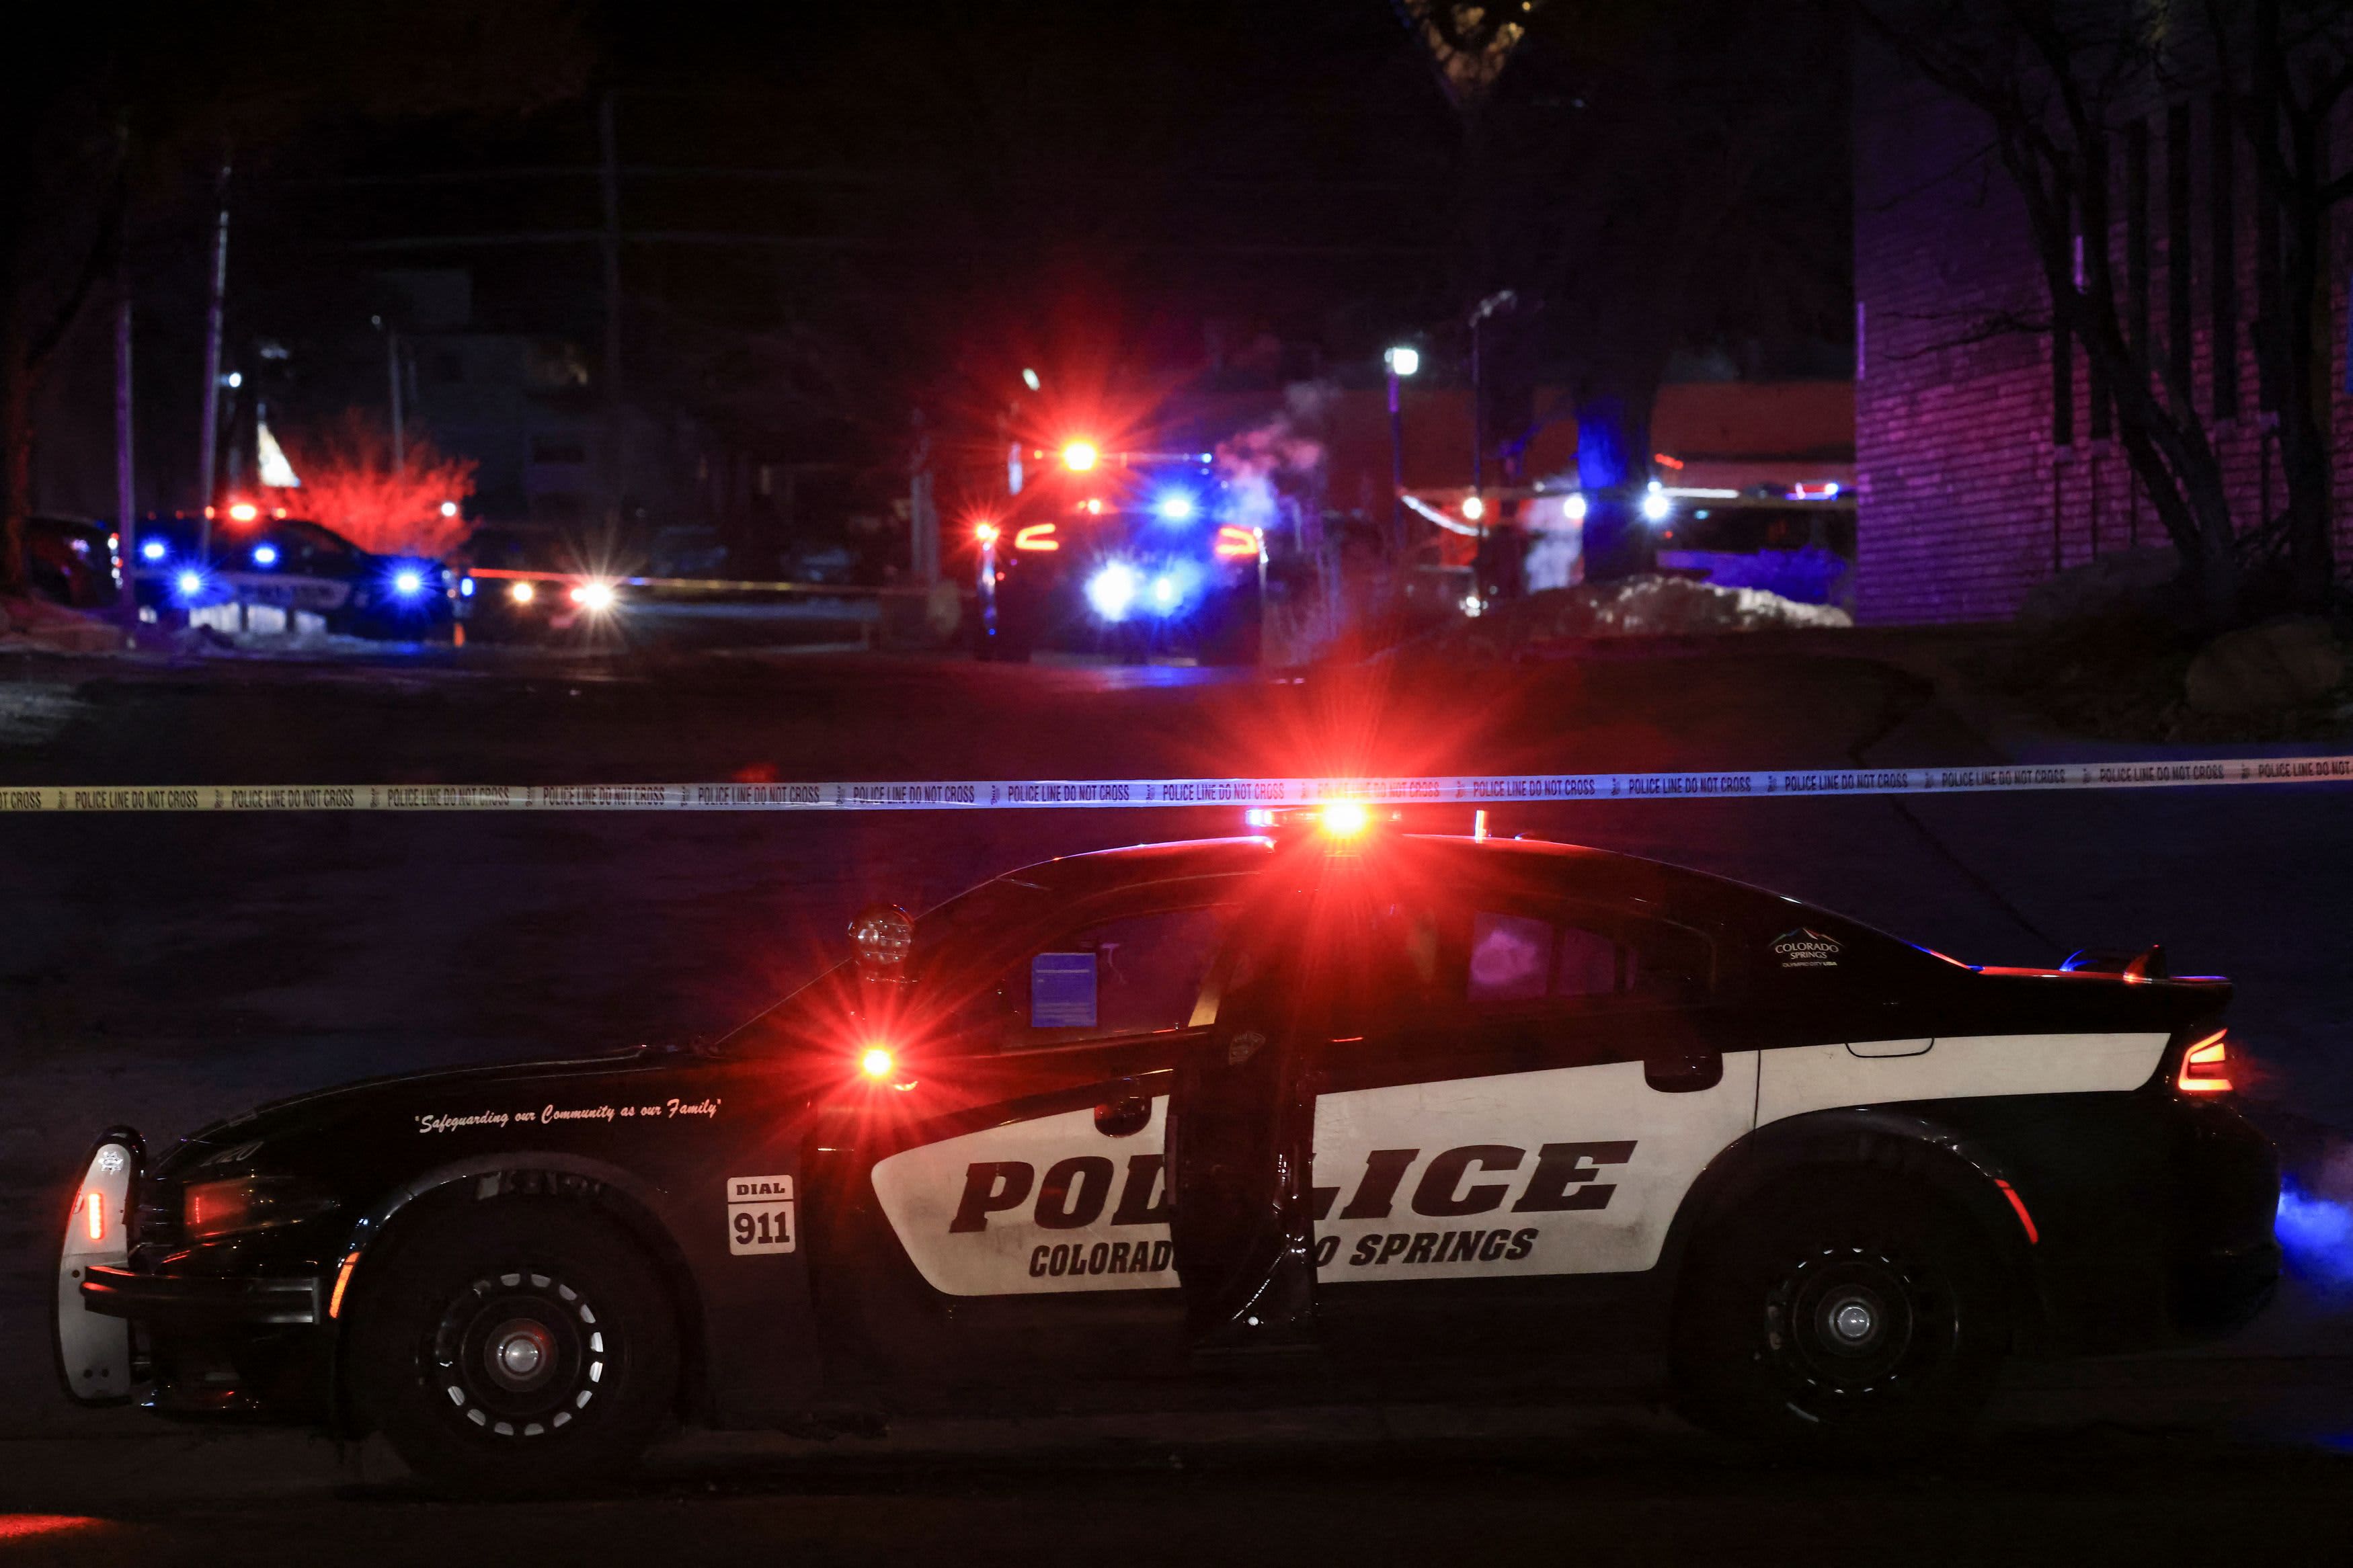 Gunman killed 5 at Colorado Springs gay club before being subdued by patrons, police